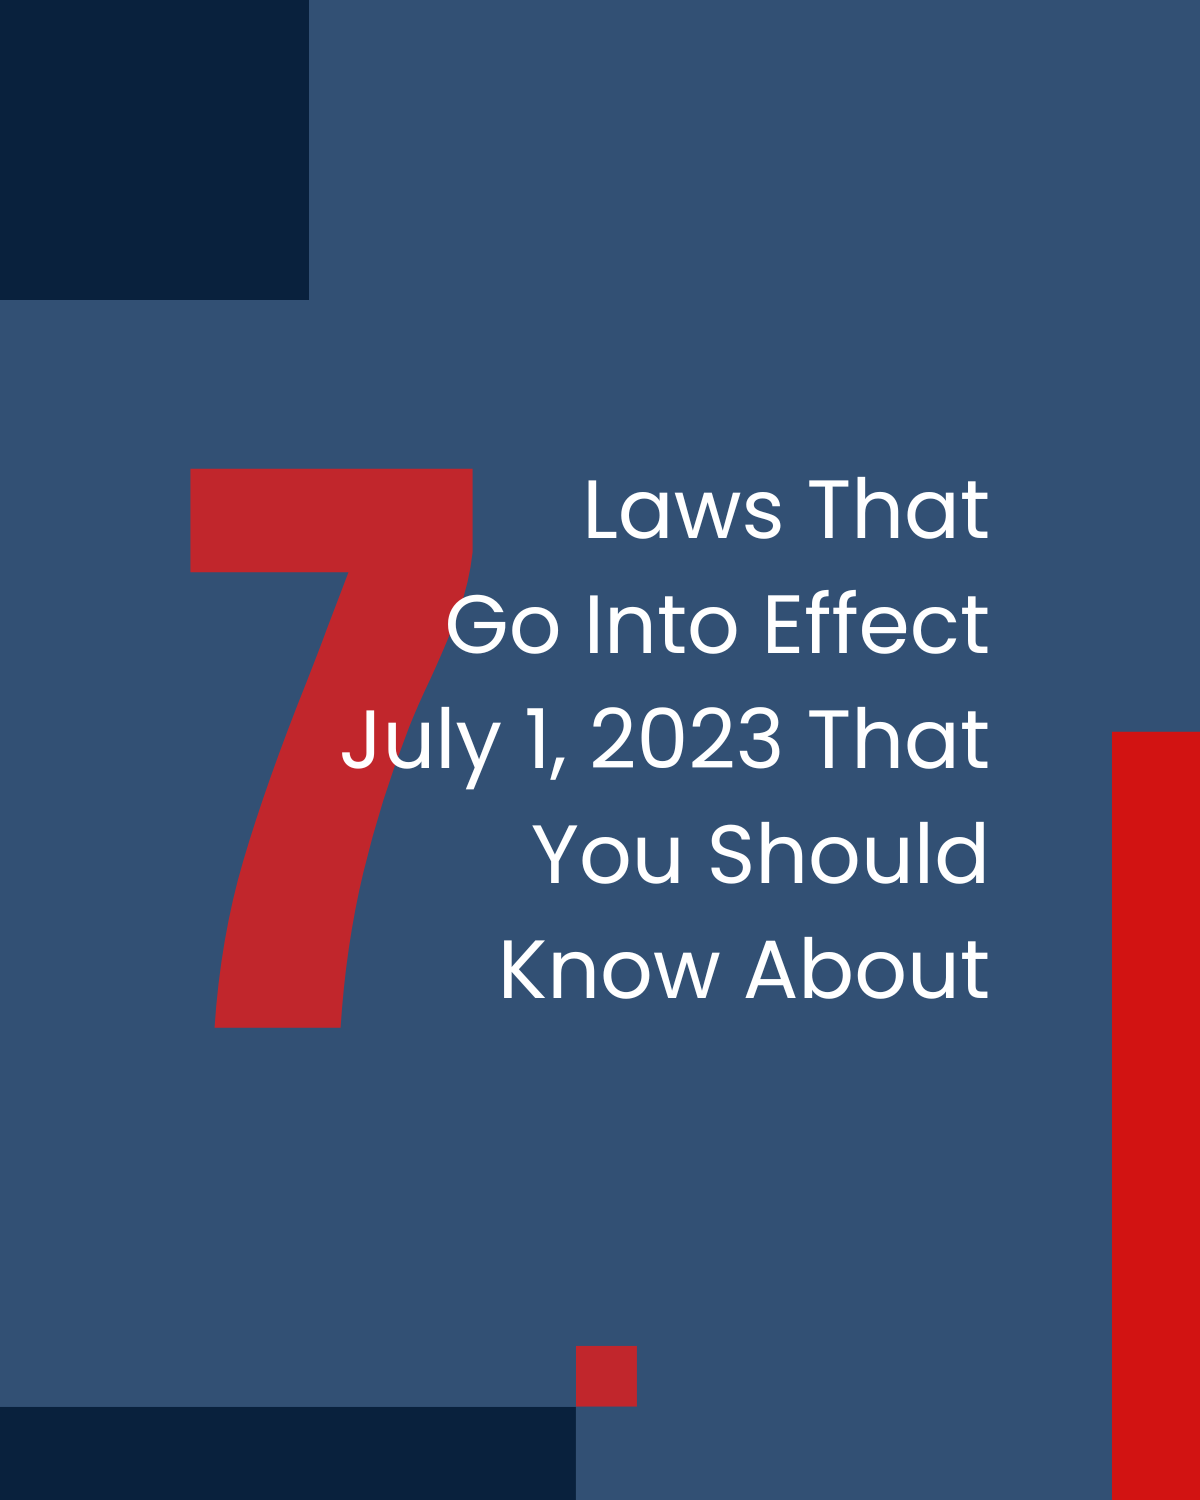 7 Laws That Go Into Effect July 1, 2023, in Virginia The Virginia